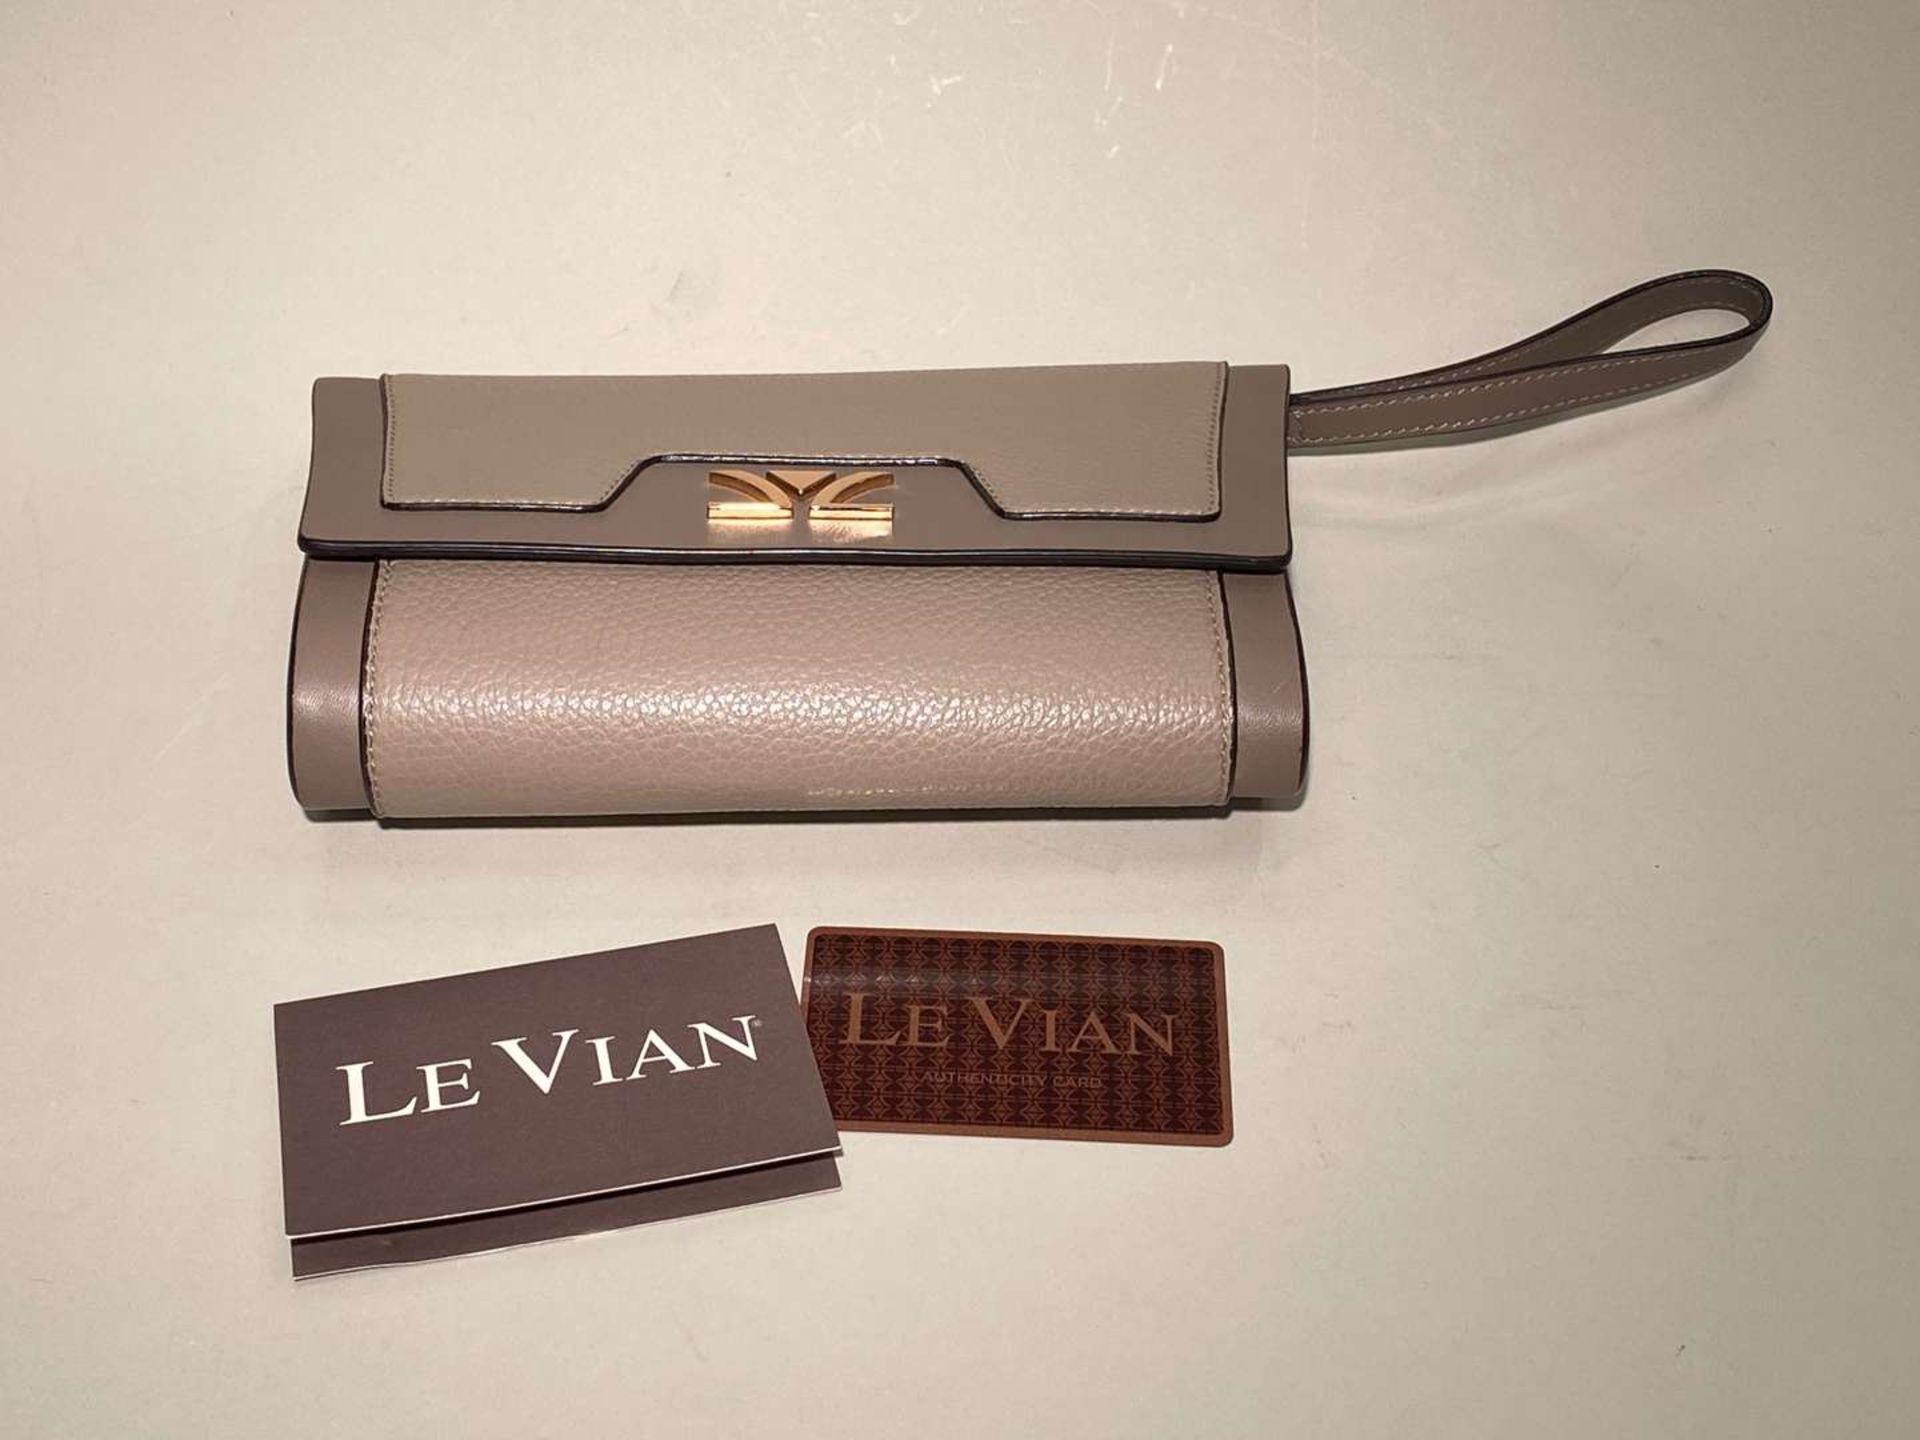 LE VIAN, Liz crossover satchel and matching clutch, - Image 10 of 10